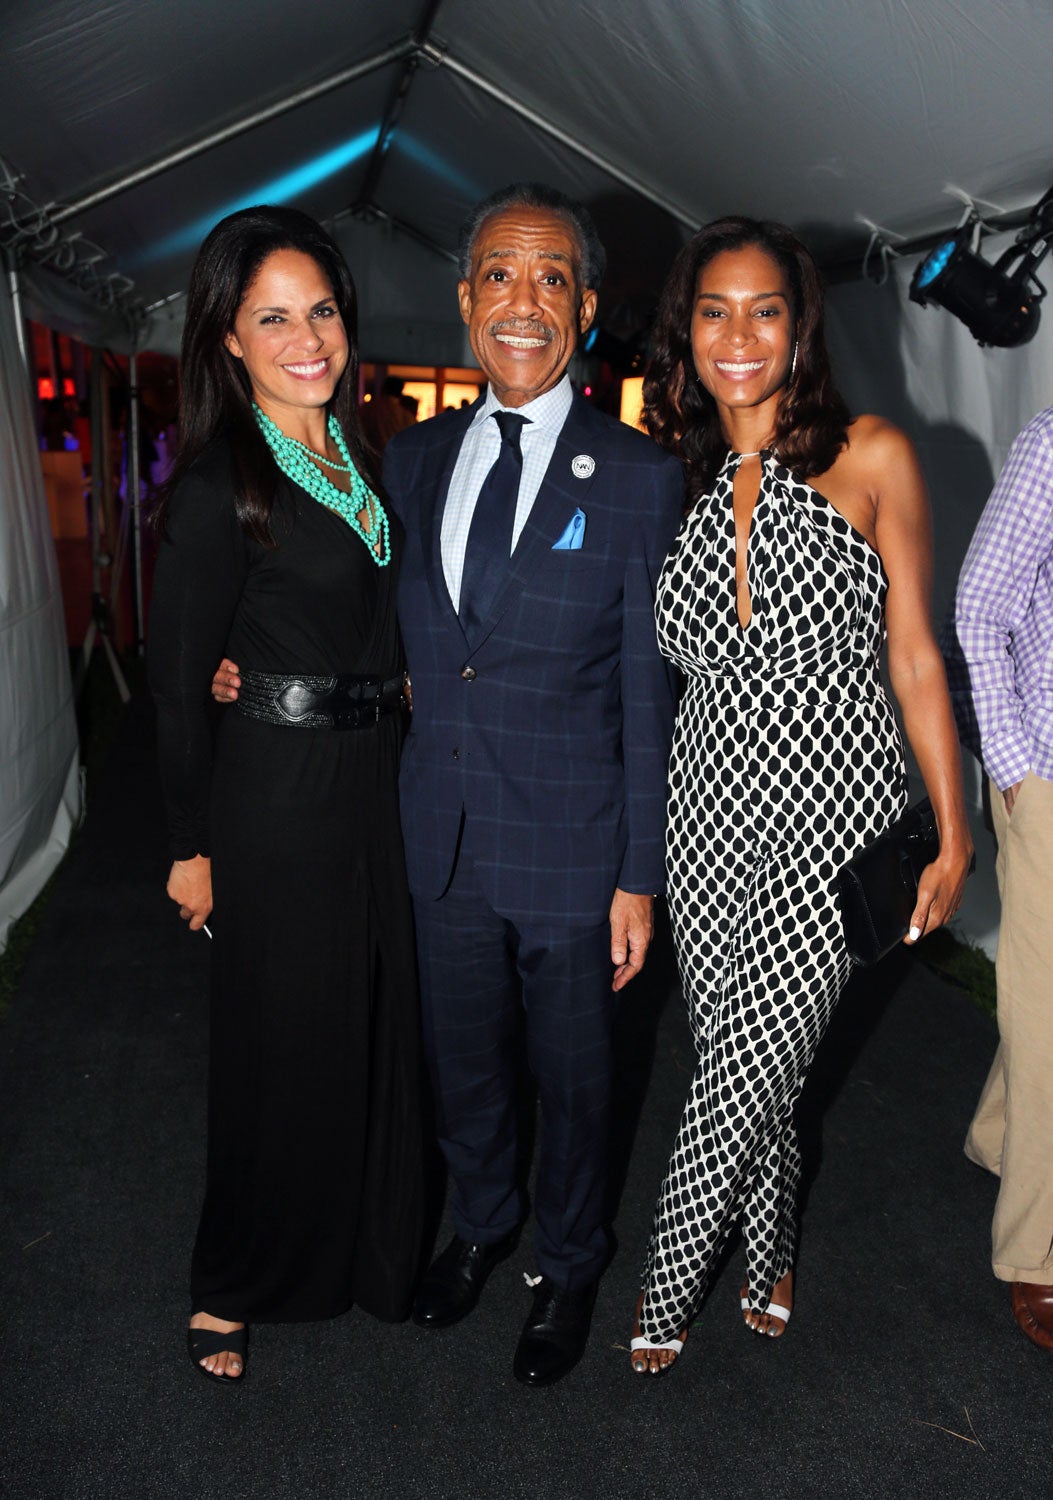 Inside Russell Simmons' 2014 Art for Life Gala